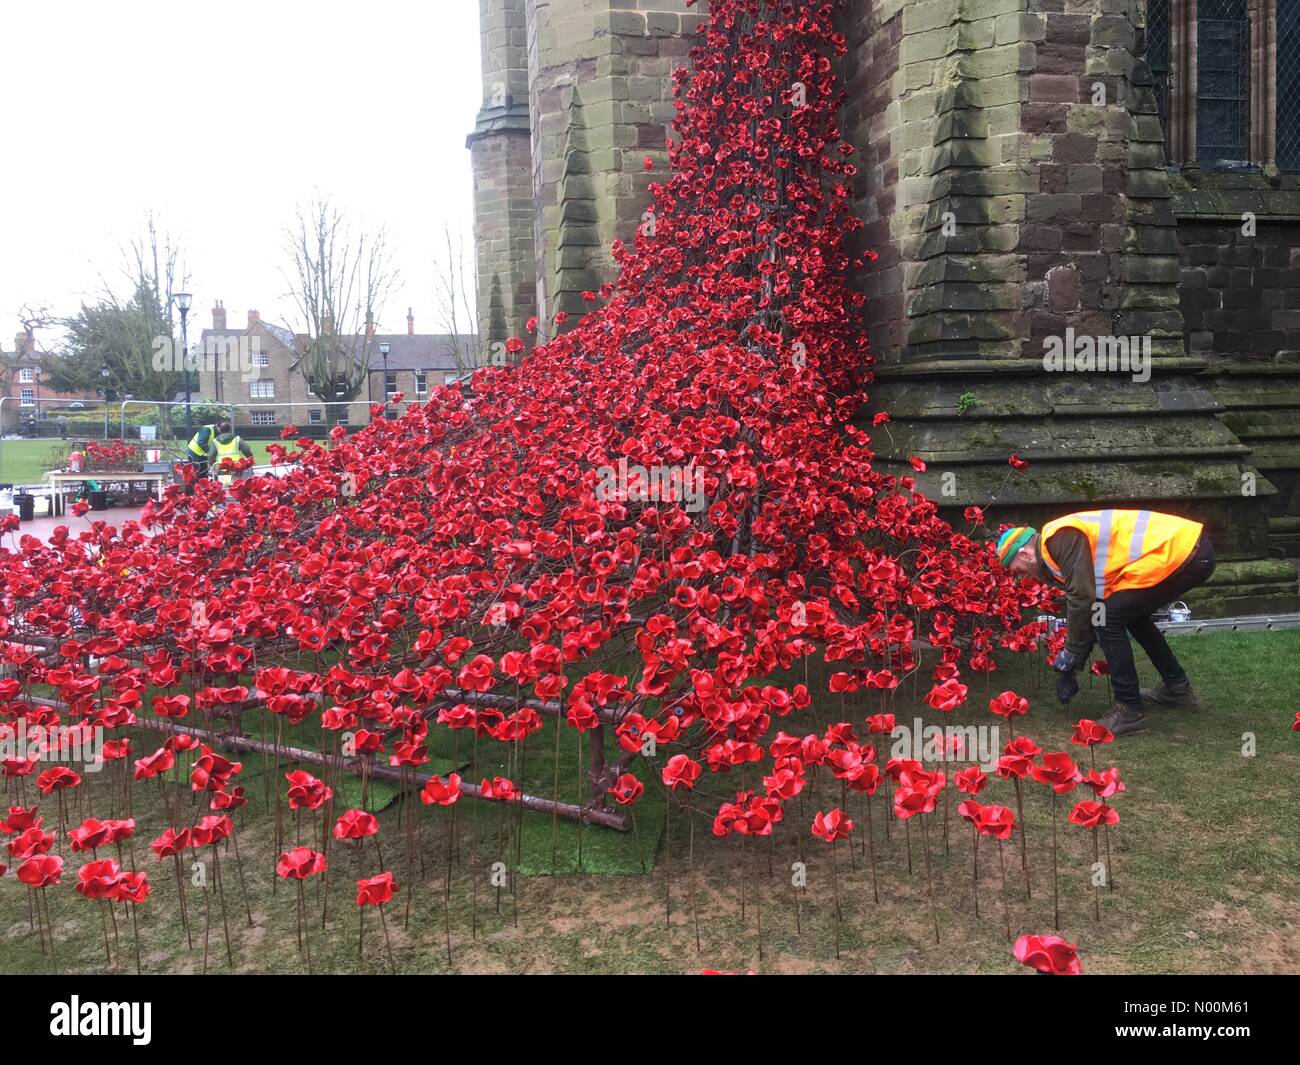 Weeping Window installation Hereford Cathedral - Hereford UK Saturday 10th March 2018 workers add ceramic poppies to the WW1 Weeping Window art installation which opens next week. Stock Photo